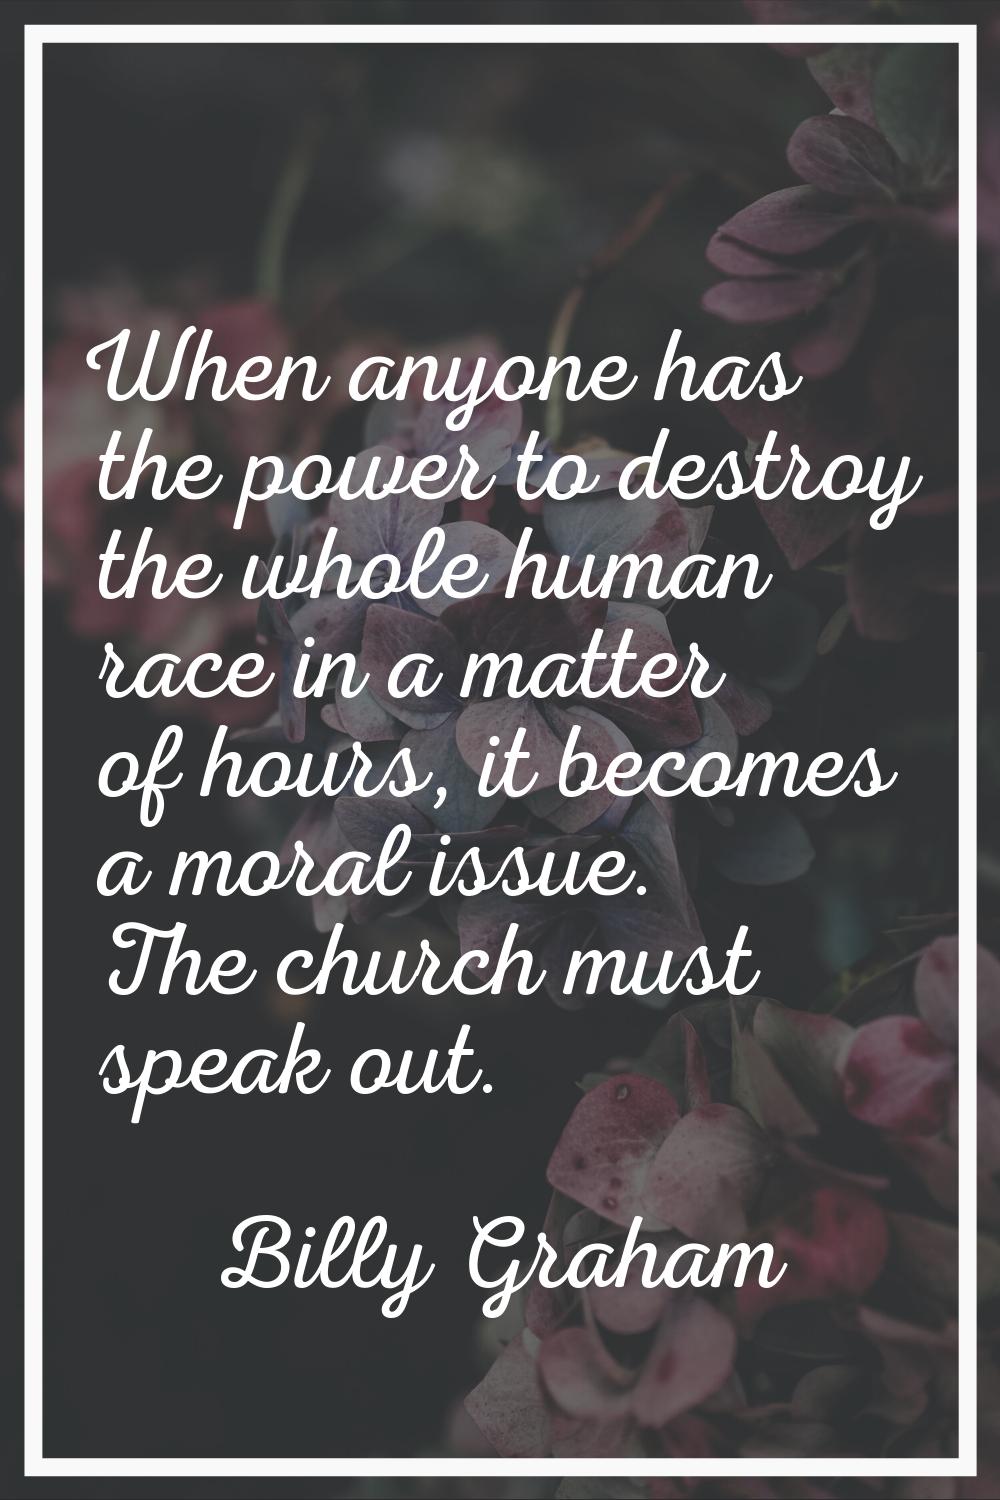 When anyone has the power to destroy the whole human race in a matter of hours, it becomes a moral 